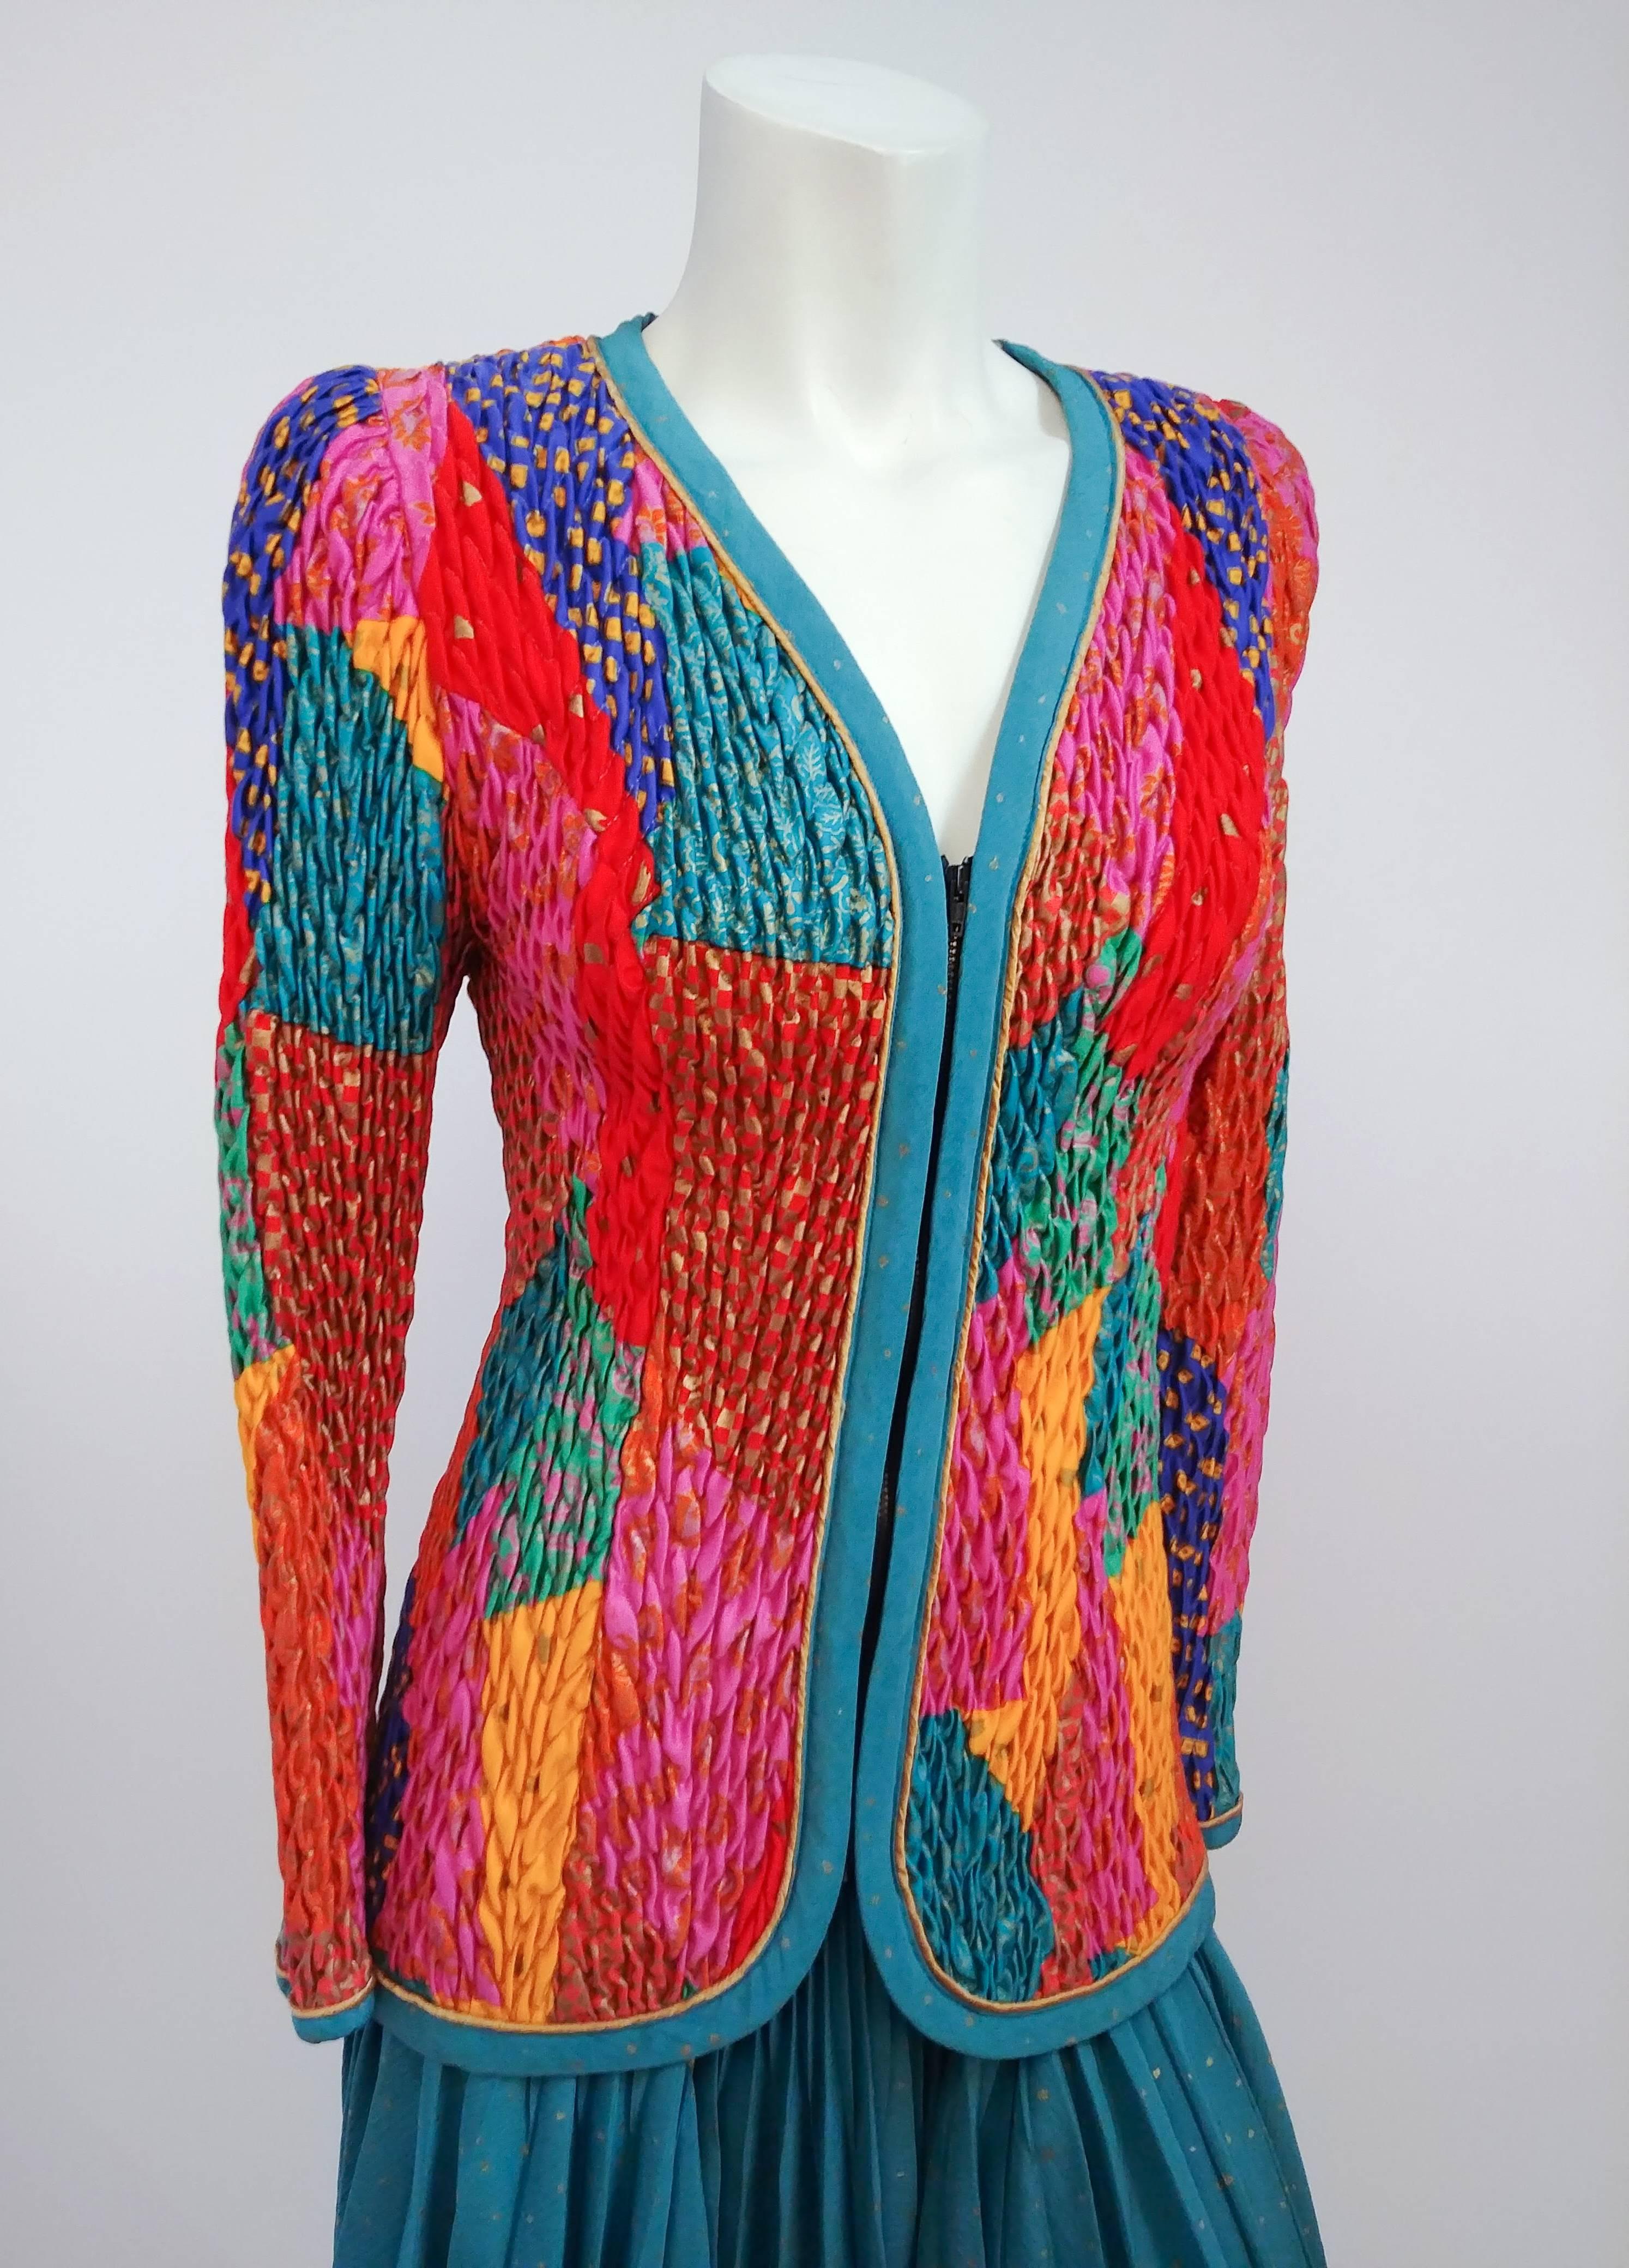 1980s Jeanne Marc Jacket, Pleated Skirt, & Harem Pant Set. Quilted multicolor jacket with padded shoulders and zip up front pairs with either pleated skirt or harem pants, both made of turquoise fabric with gold diamond print. 